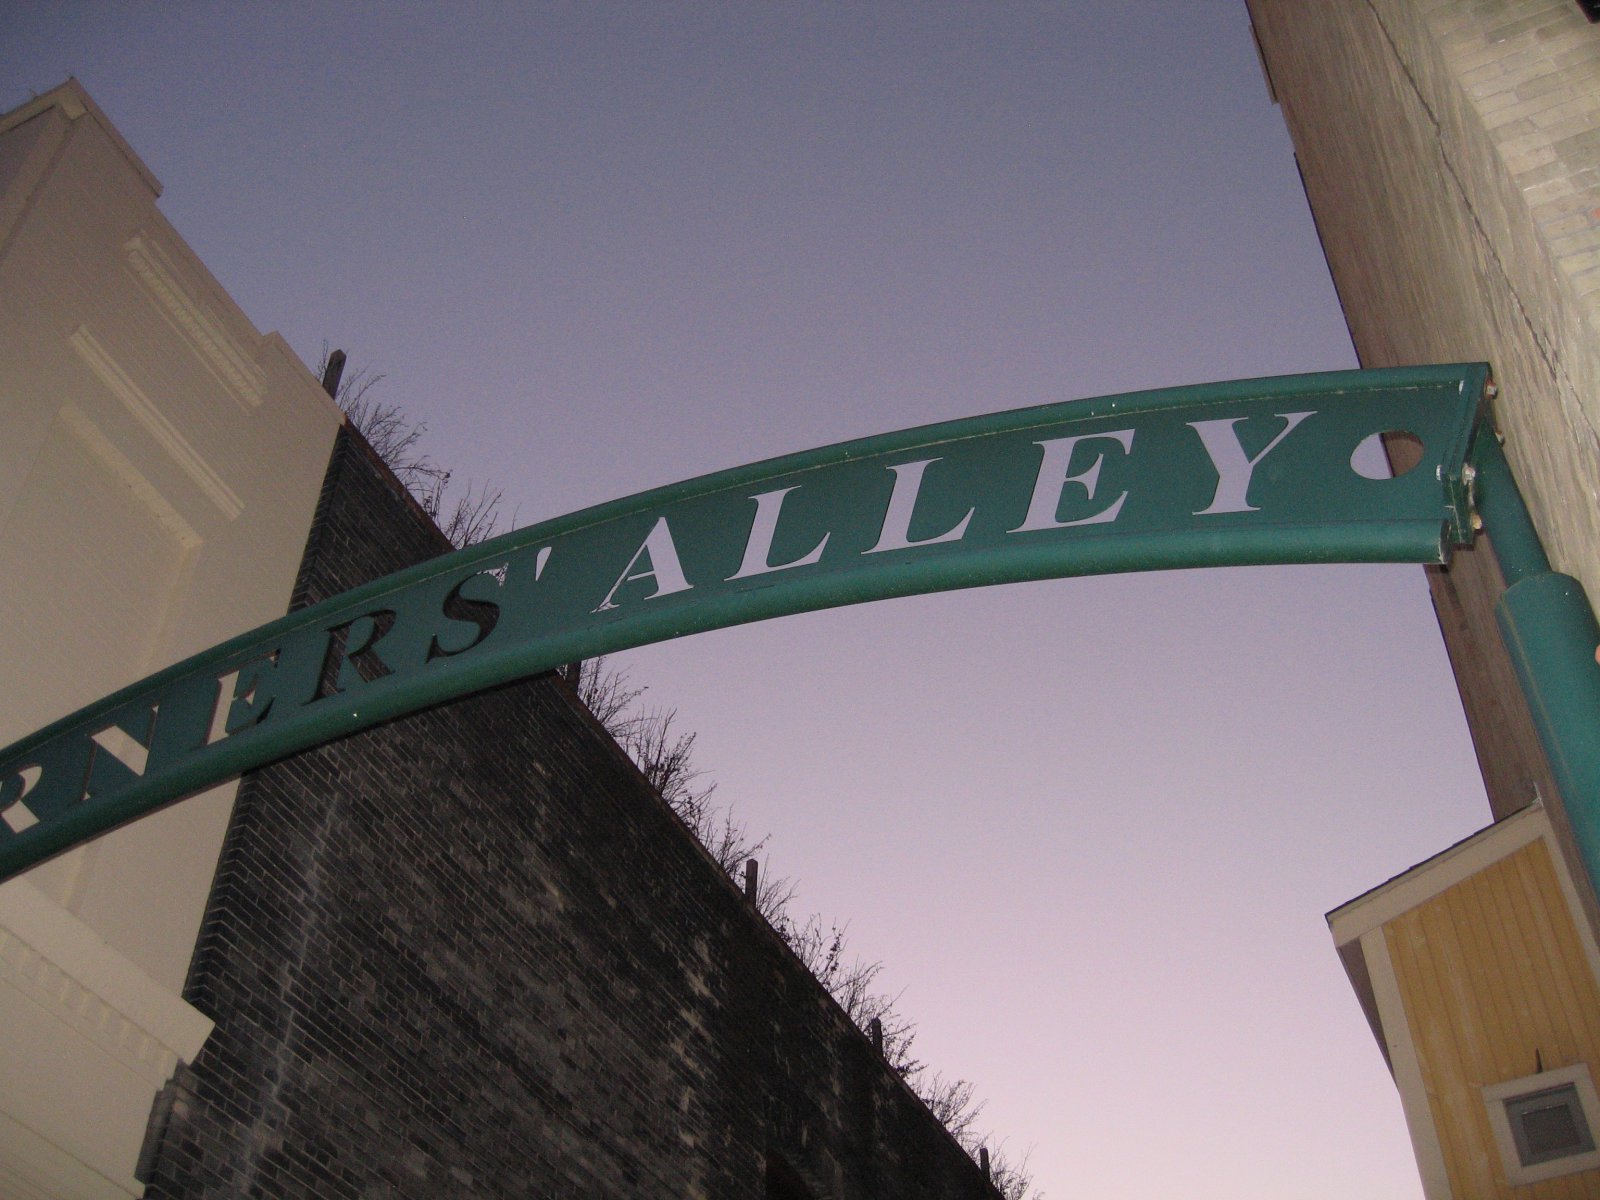 The Brass Alley